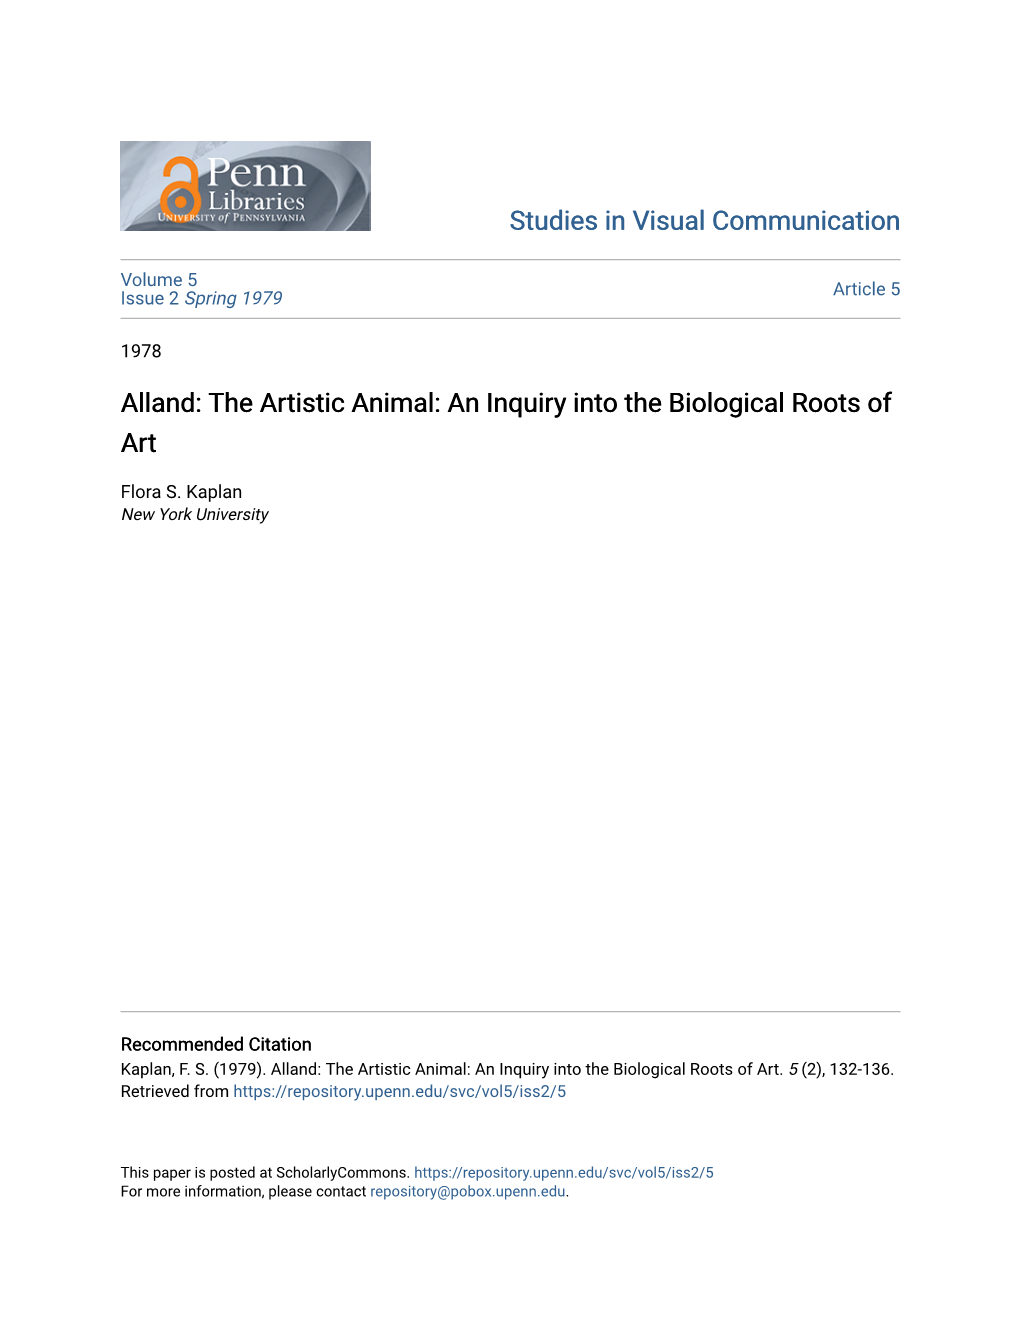 Alland: the Artistic Animal: an Inquiry Into the Biological Roots of Art